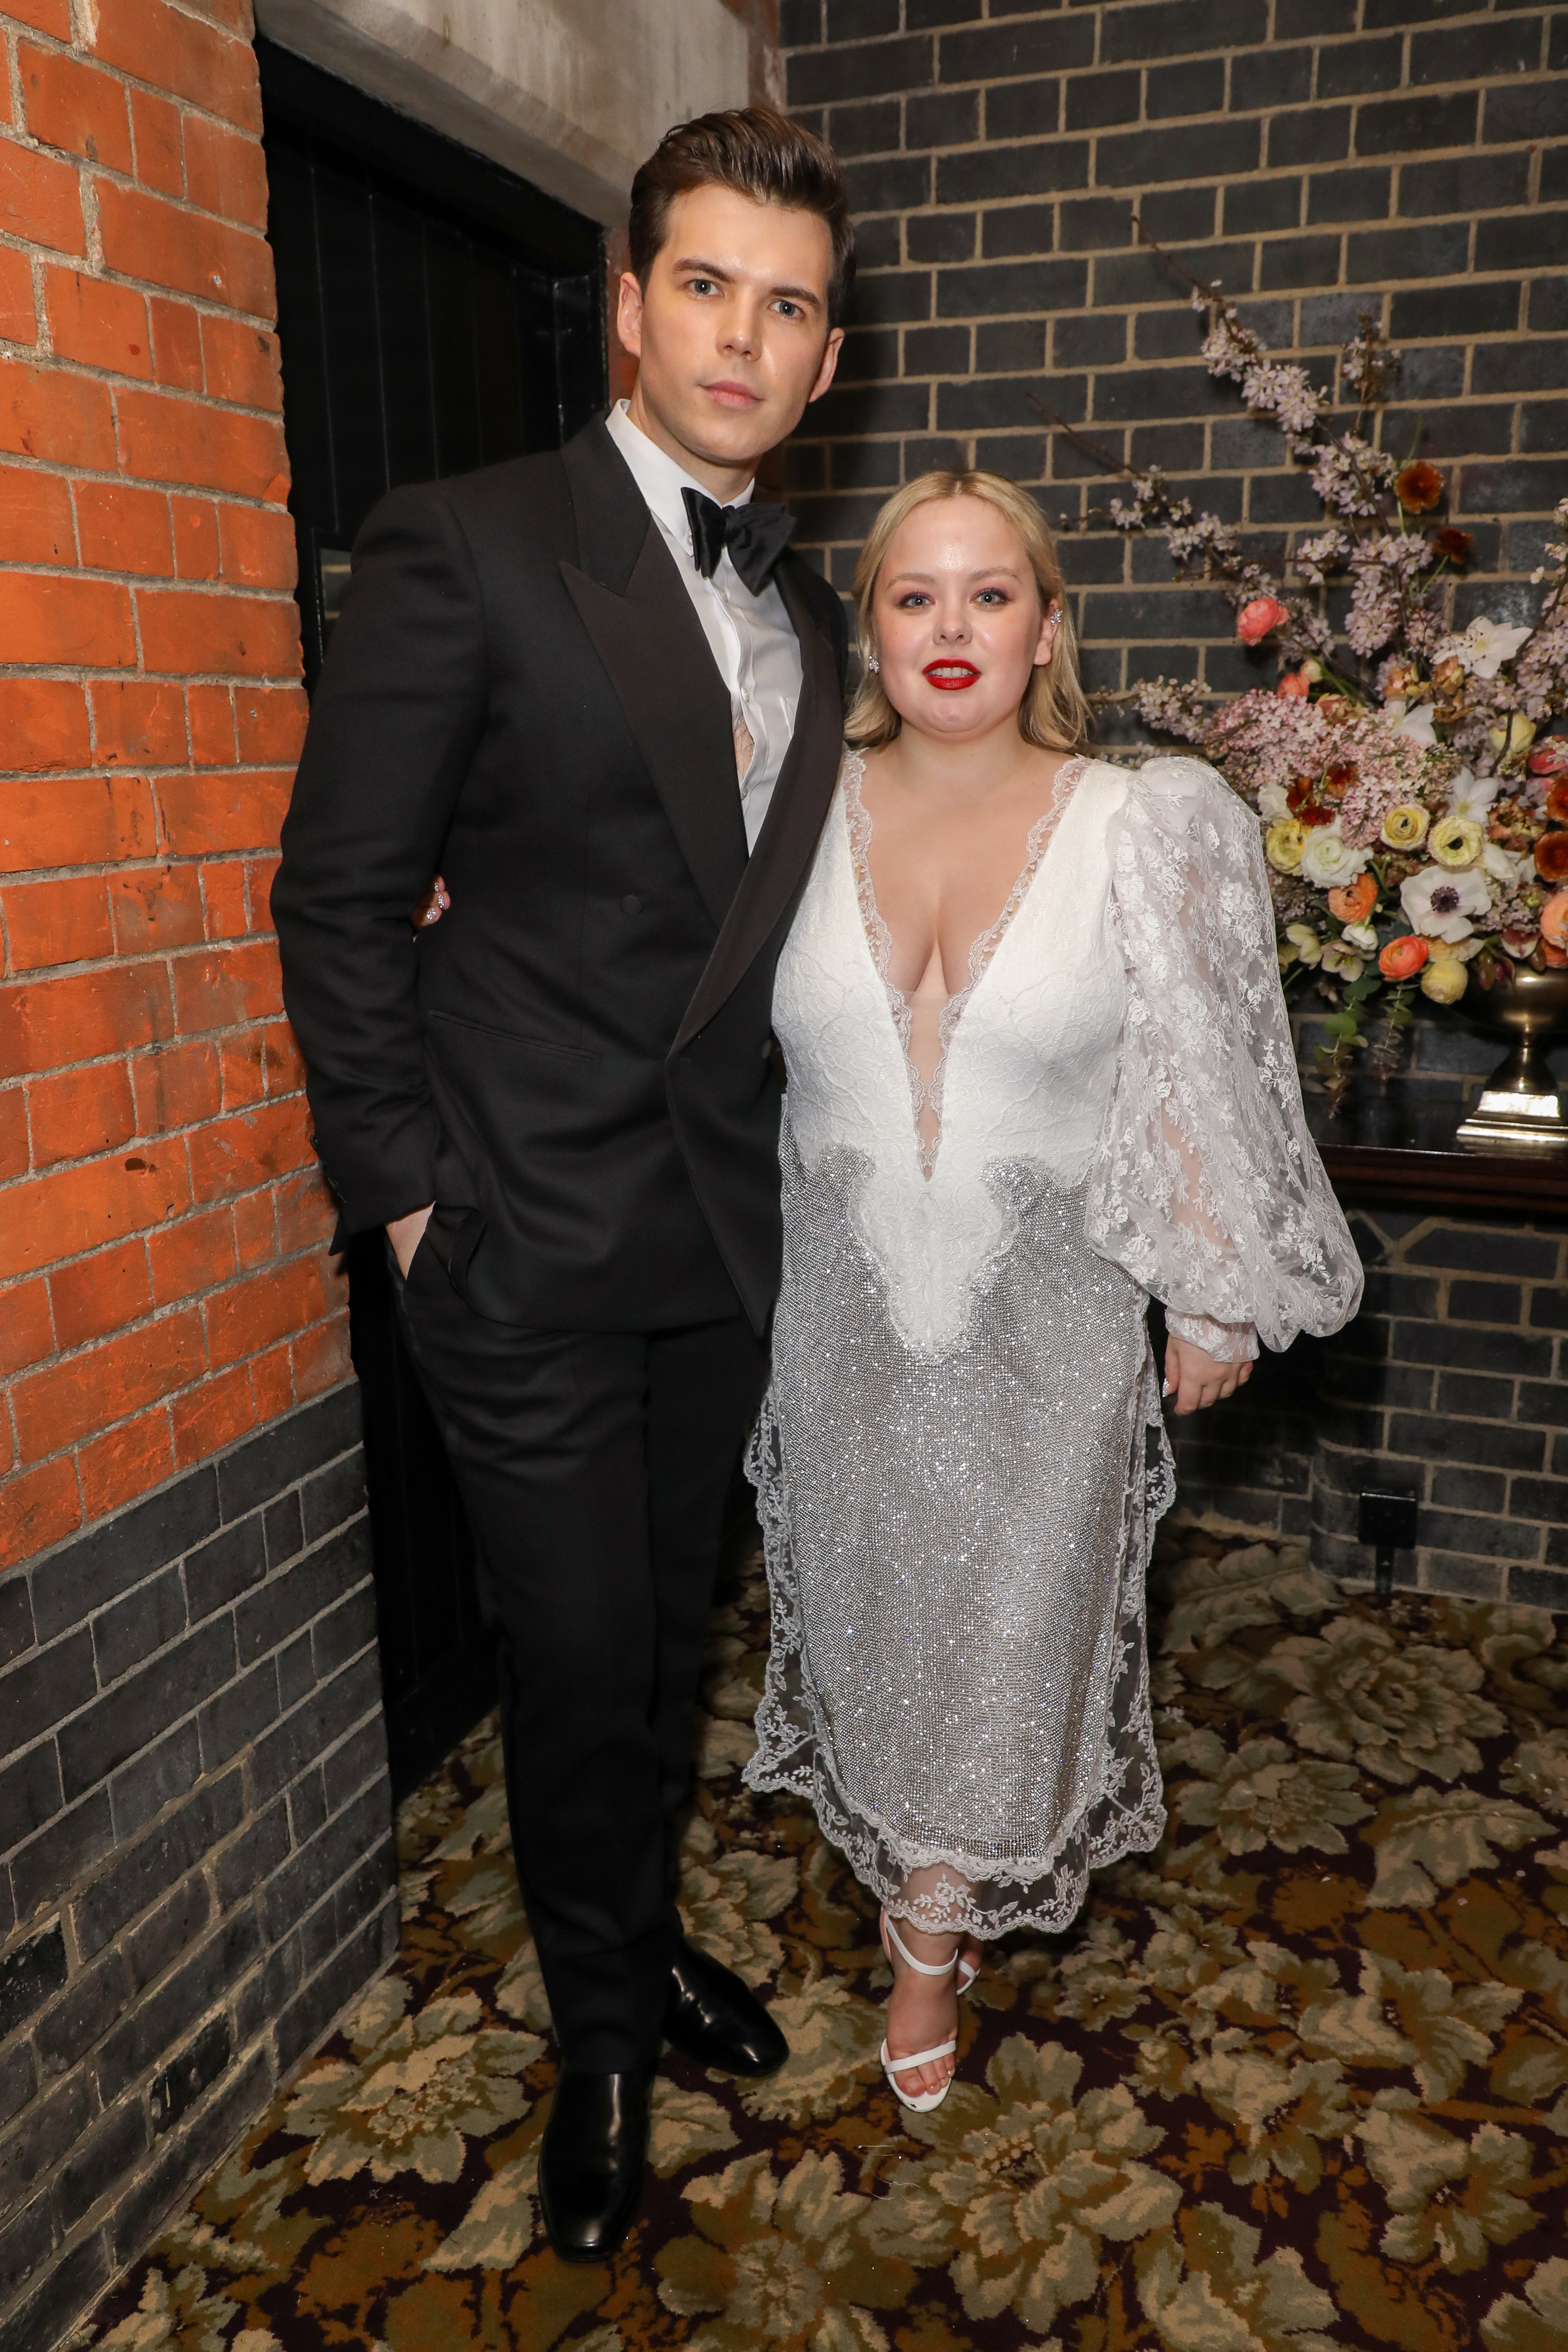 Luke Newton and Nicola Coughlan at the Netflix BAFTA 2022 party held at Chiltern Firehouse in London, England, on March 13, 2022. | Source: Getty Images